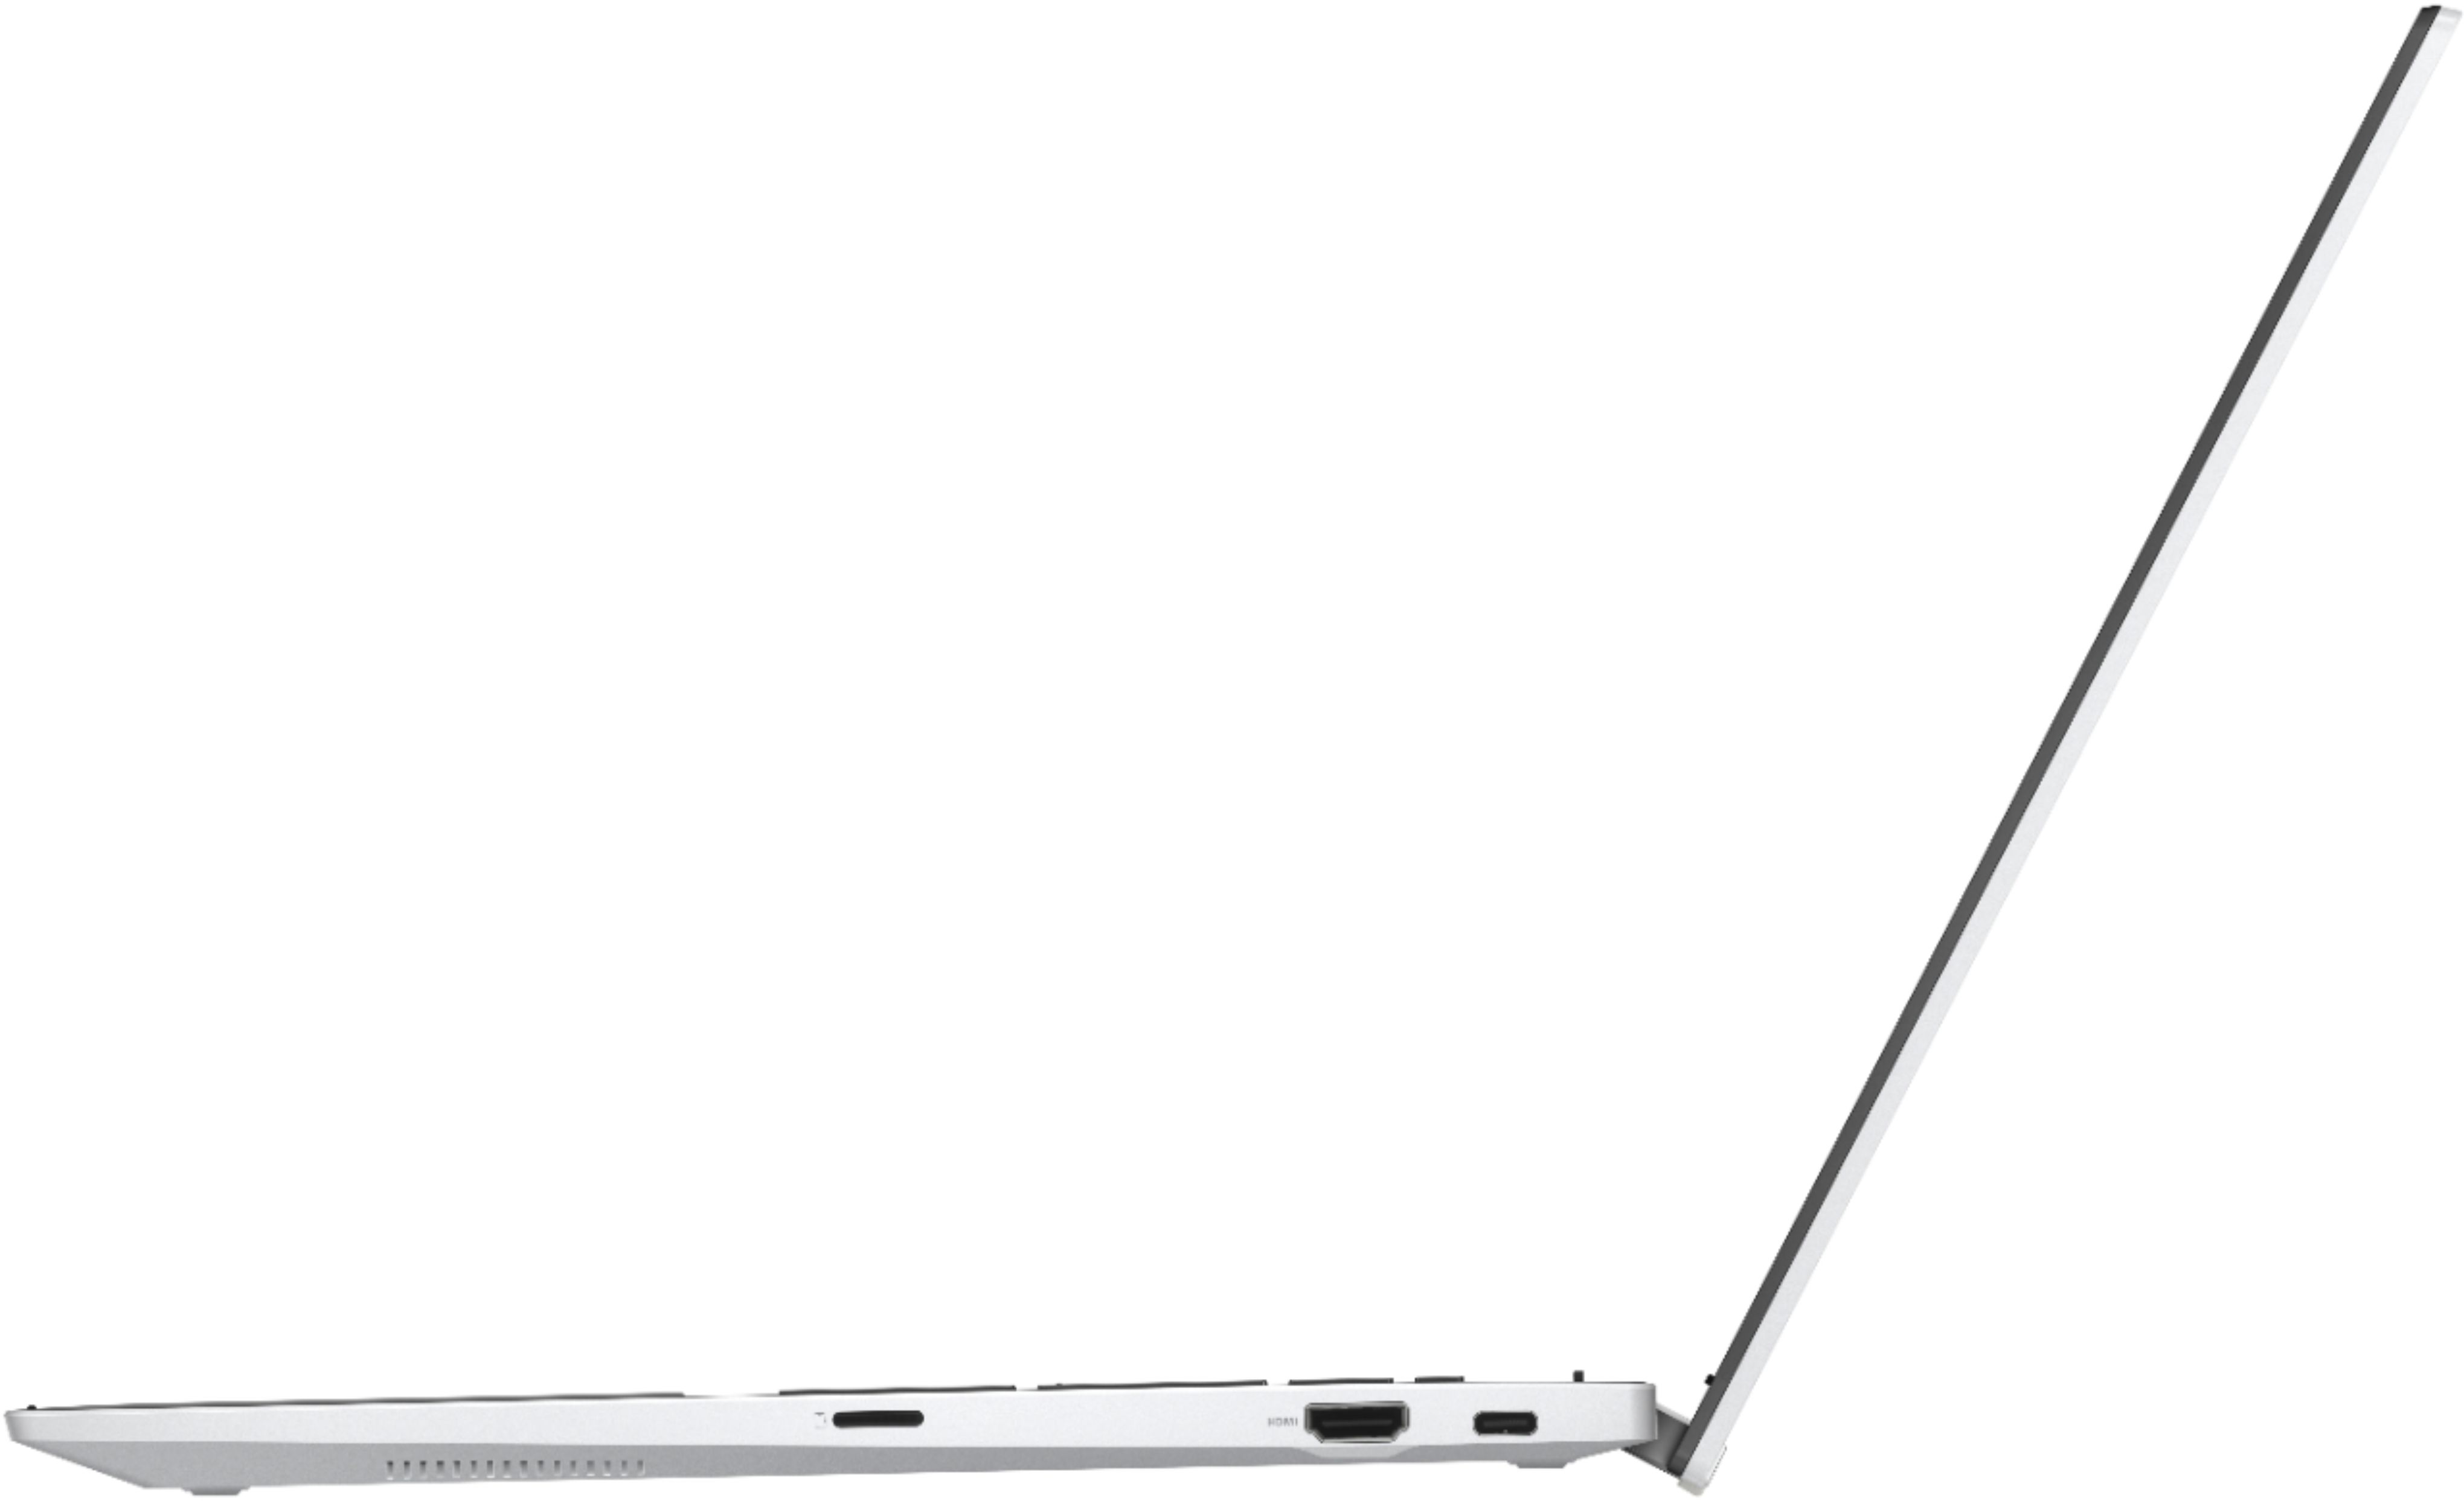 Asus 2-in-1 Touch Screen Chromebook in Matte White msquarehrm.com